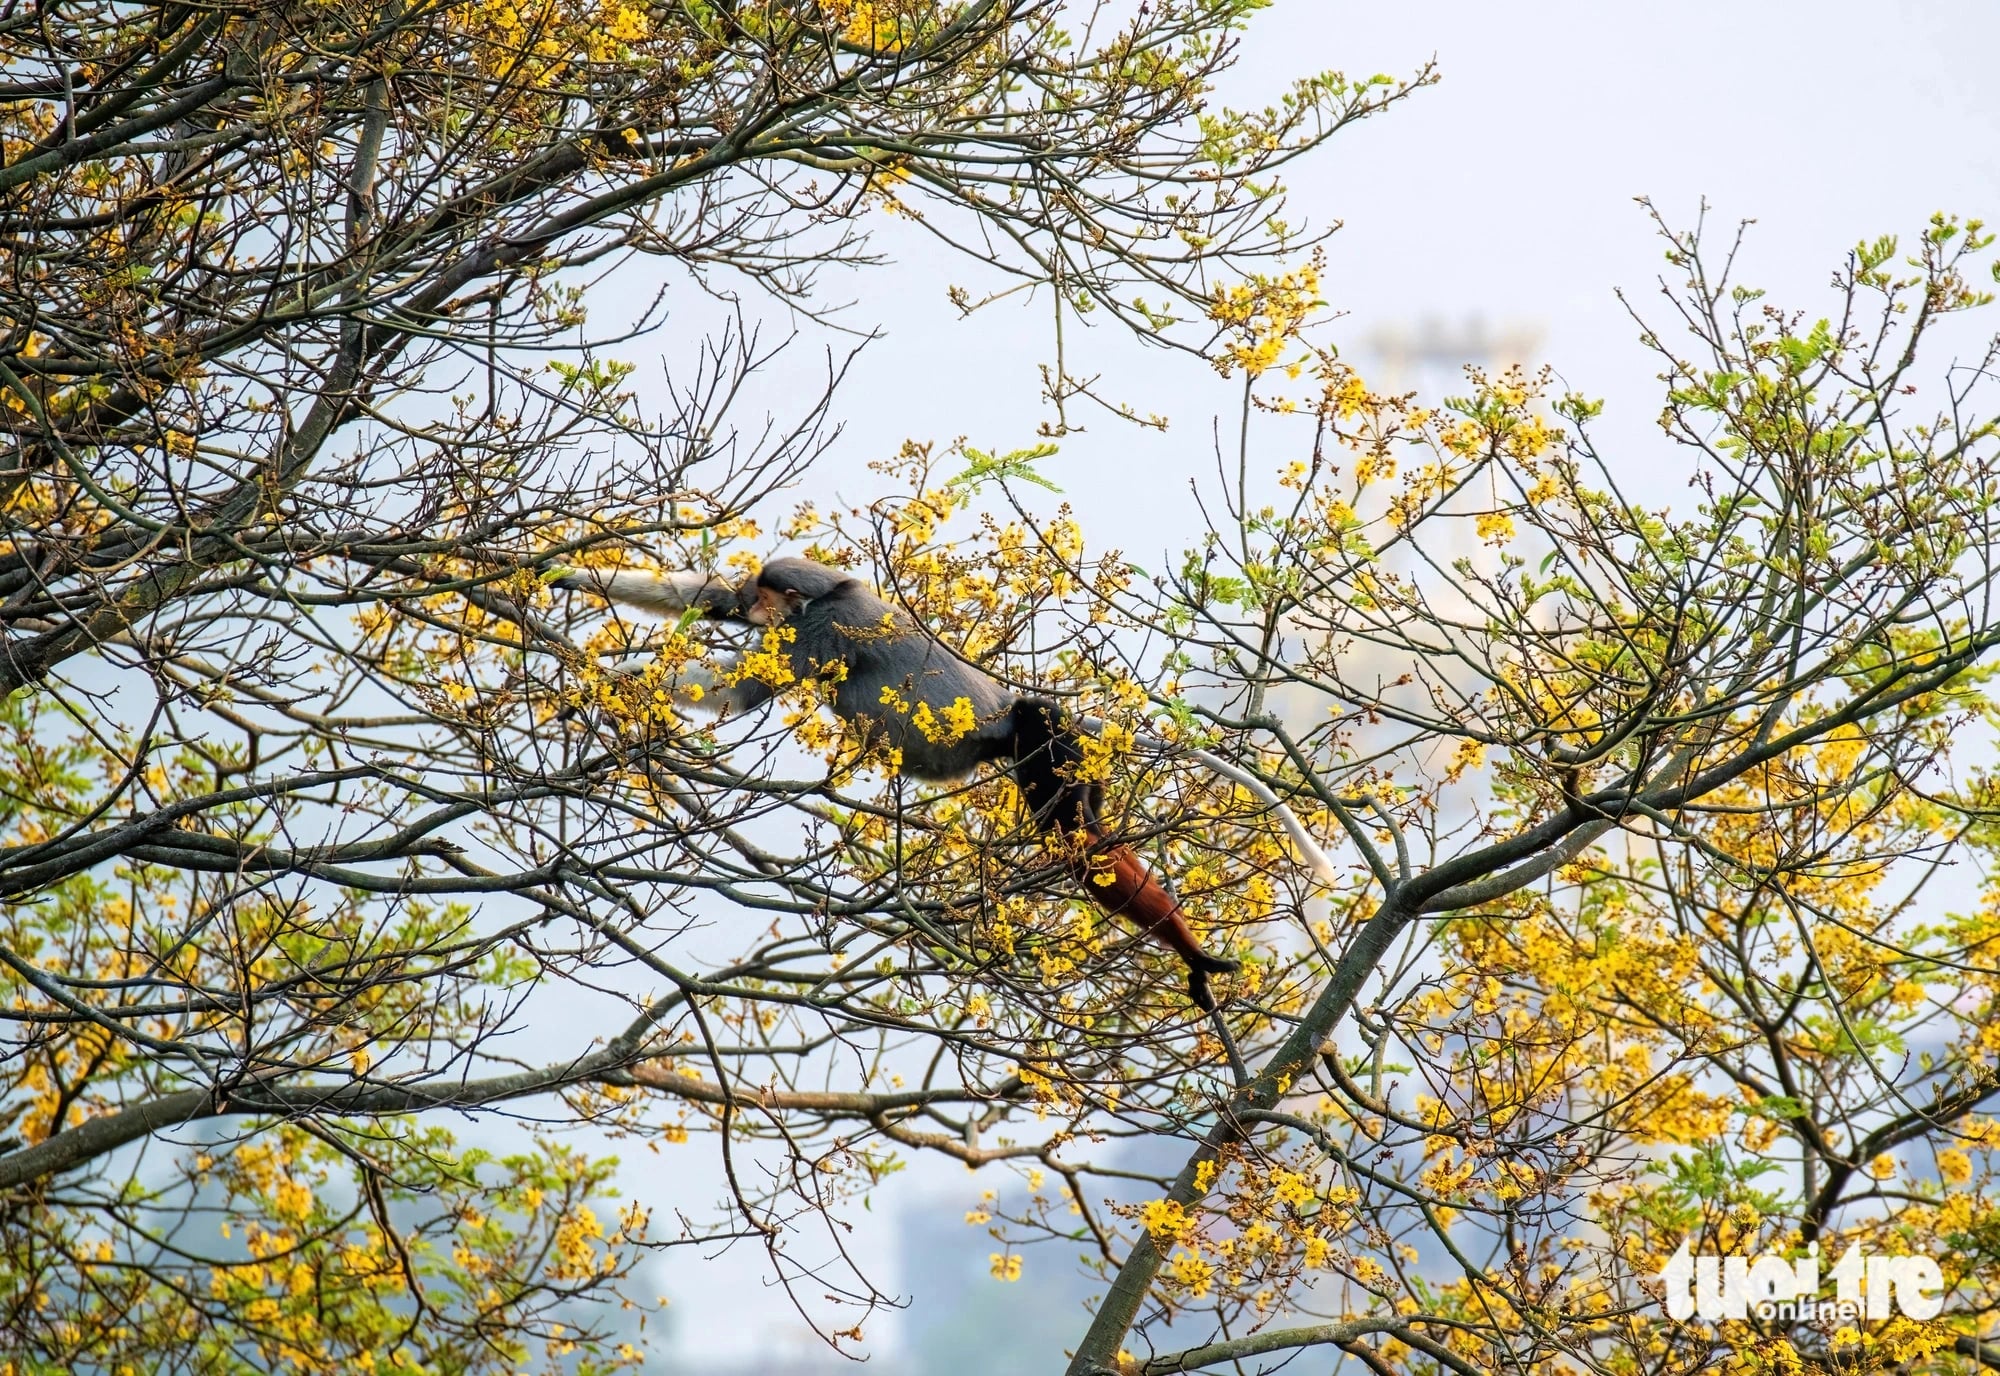 A red-shanked douc langur is spotted on a blossoming yellow flamboyant tree on Son Tra Peninsula, Son Tra District, Da Nang City, central Vietnam. Photo: Tran Minh Tri